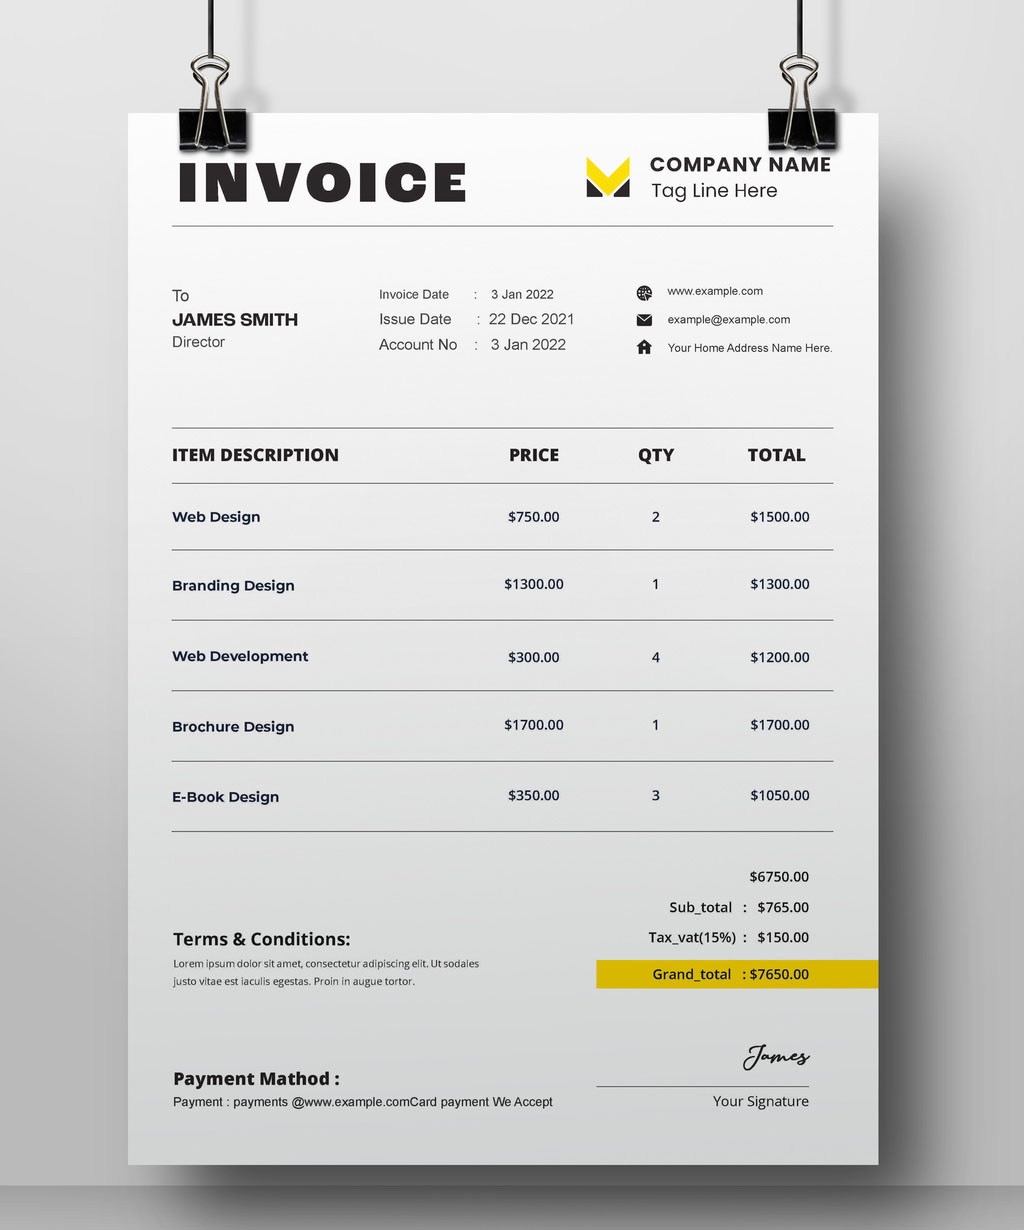 Clean Invoice Layout